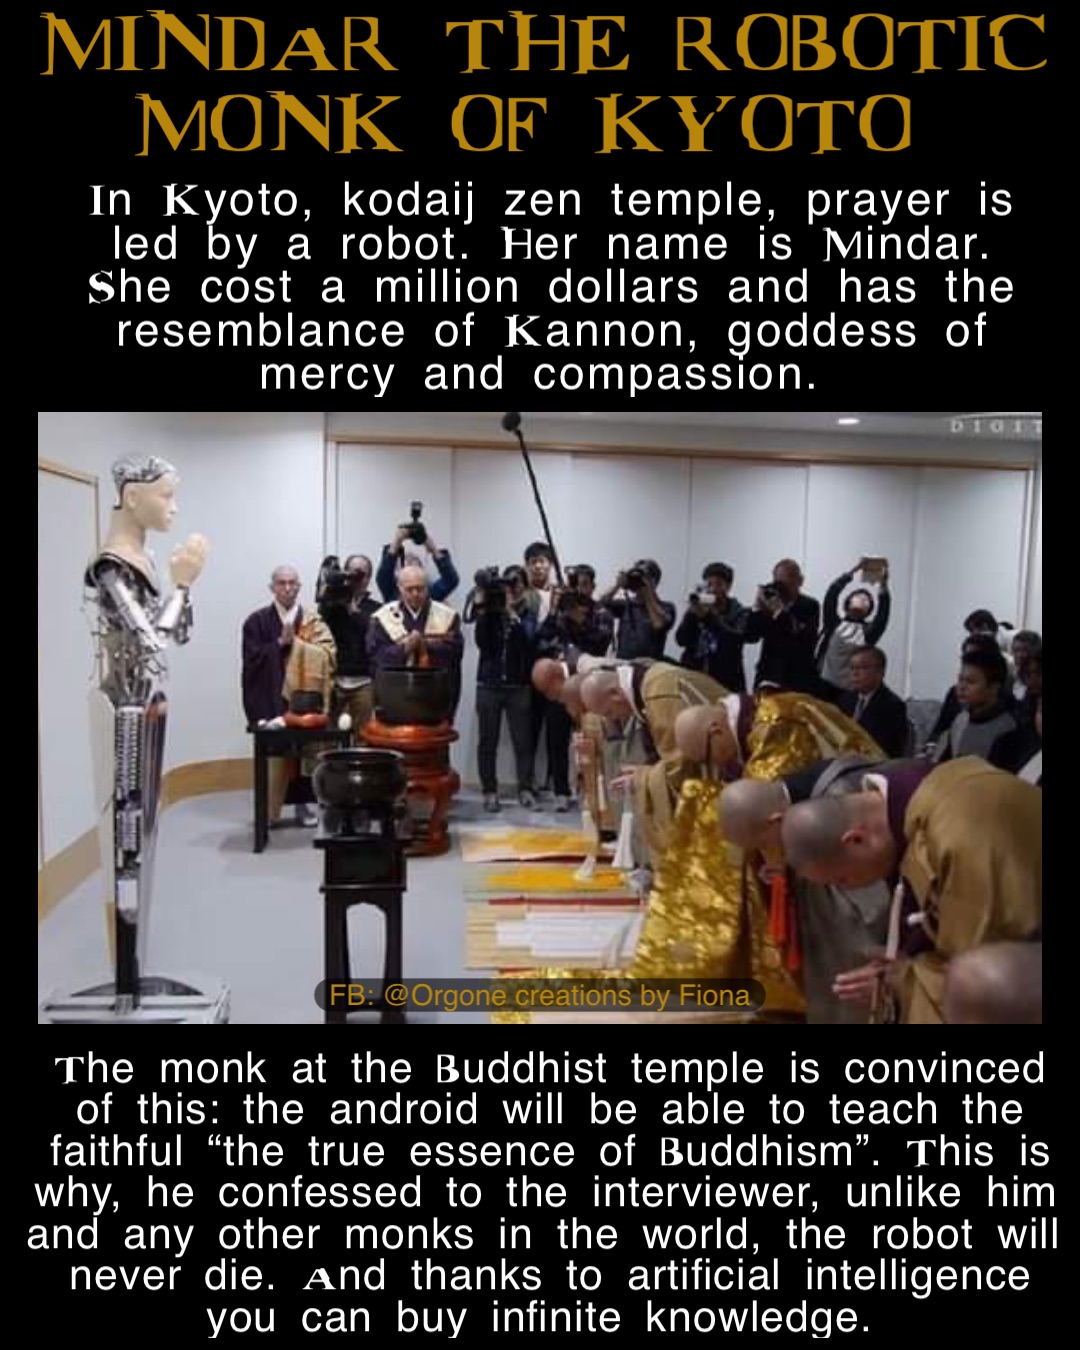 In Kyoto, kodaij zen temple, prayer is led by a robot. Her name is Mindar. She cost a million dollars and has the resemblance of Kannon, goddess of mercy and compassion. The monk at the Buddhist temple is convinced of this: the android will be able to teach the faithful “the true essence of Buddhism”. This is why, he confessed to the interviewer, unlike him and any other monks in the world, the robot will never die. And thanks to artificial intelligence you can buy infinite knowledge. MINDAR THE ROBOTIC 
MONK OF KYOTO FB: @Orgone creations by Fiona